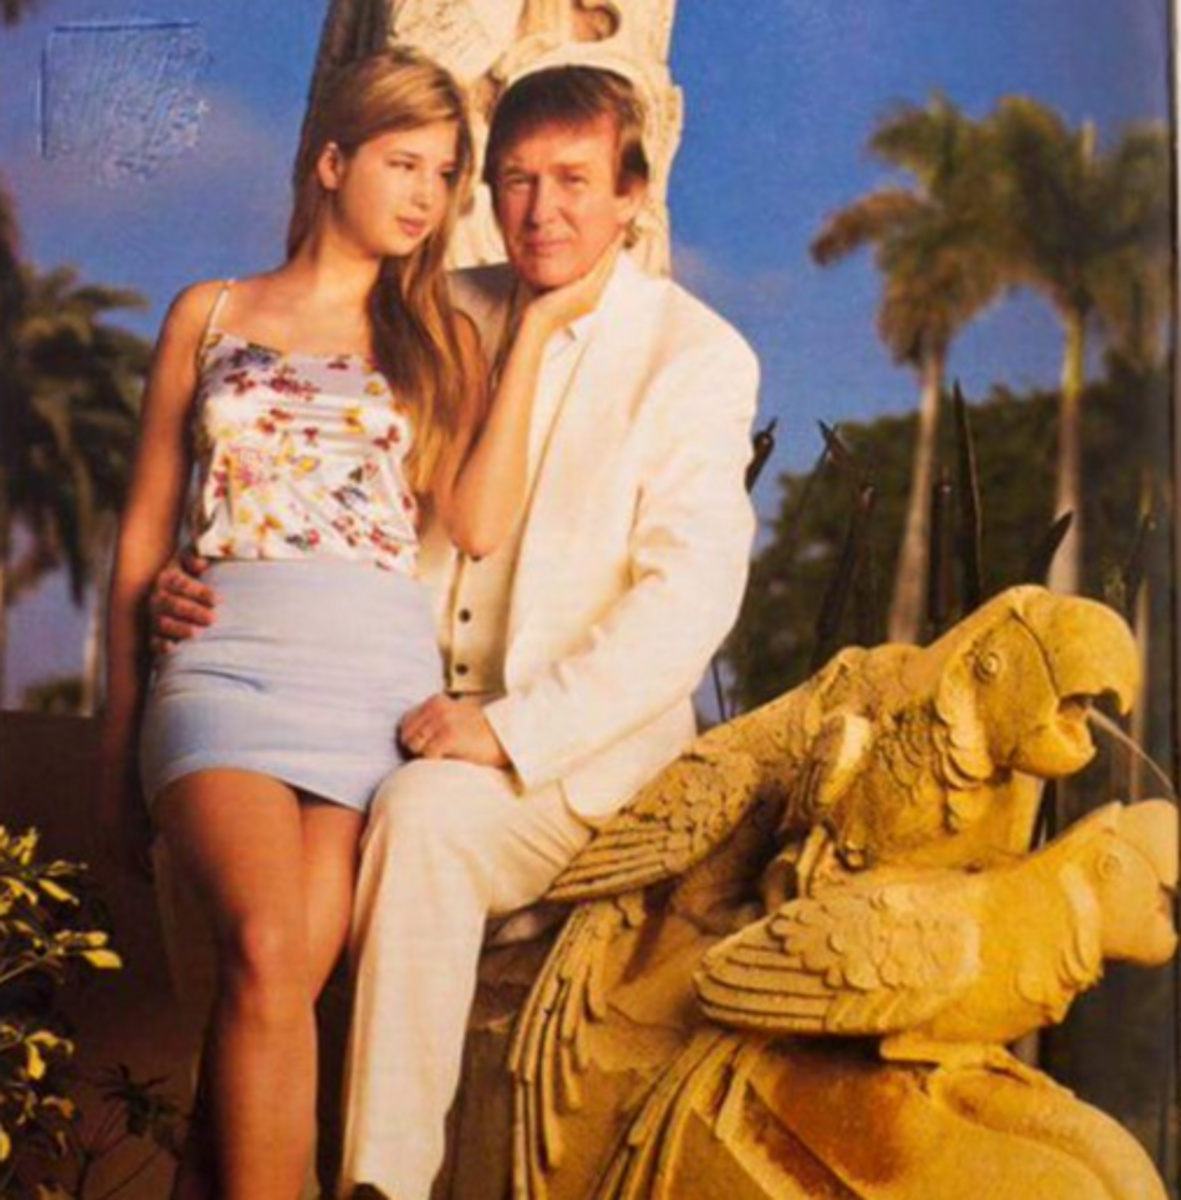 Albums 94+ Images ivanka and donald trump photos Excellent